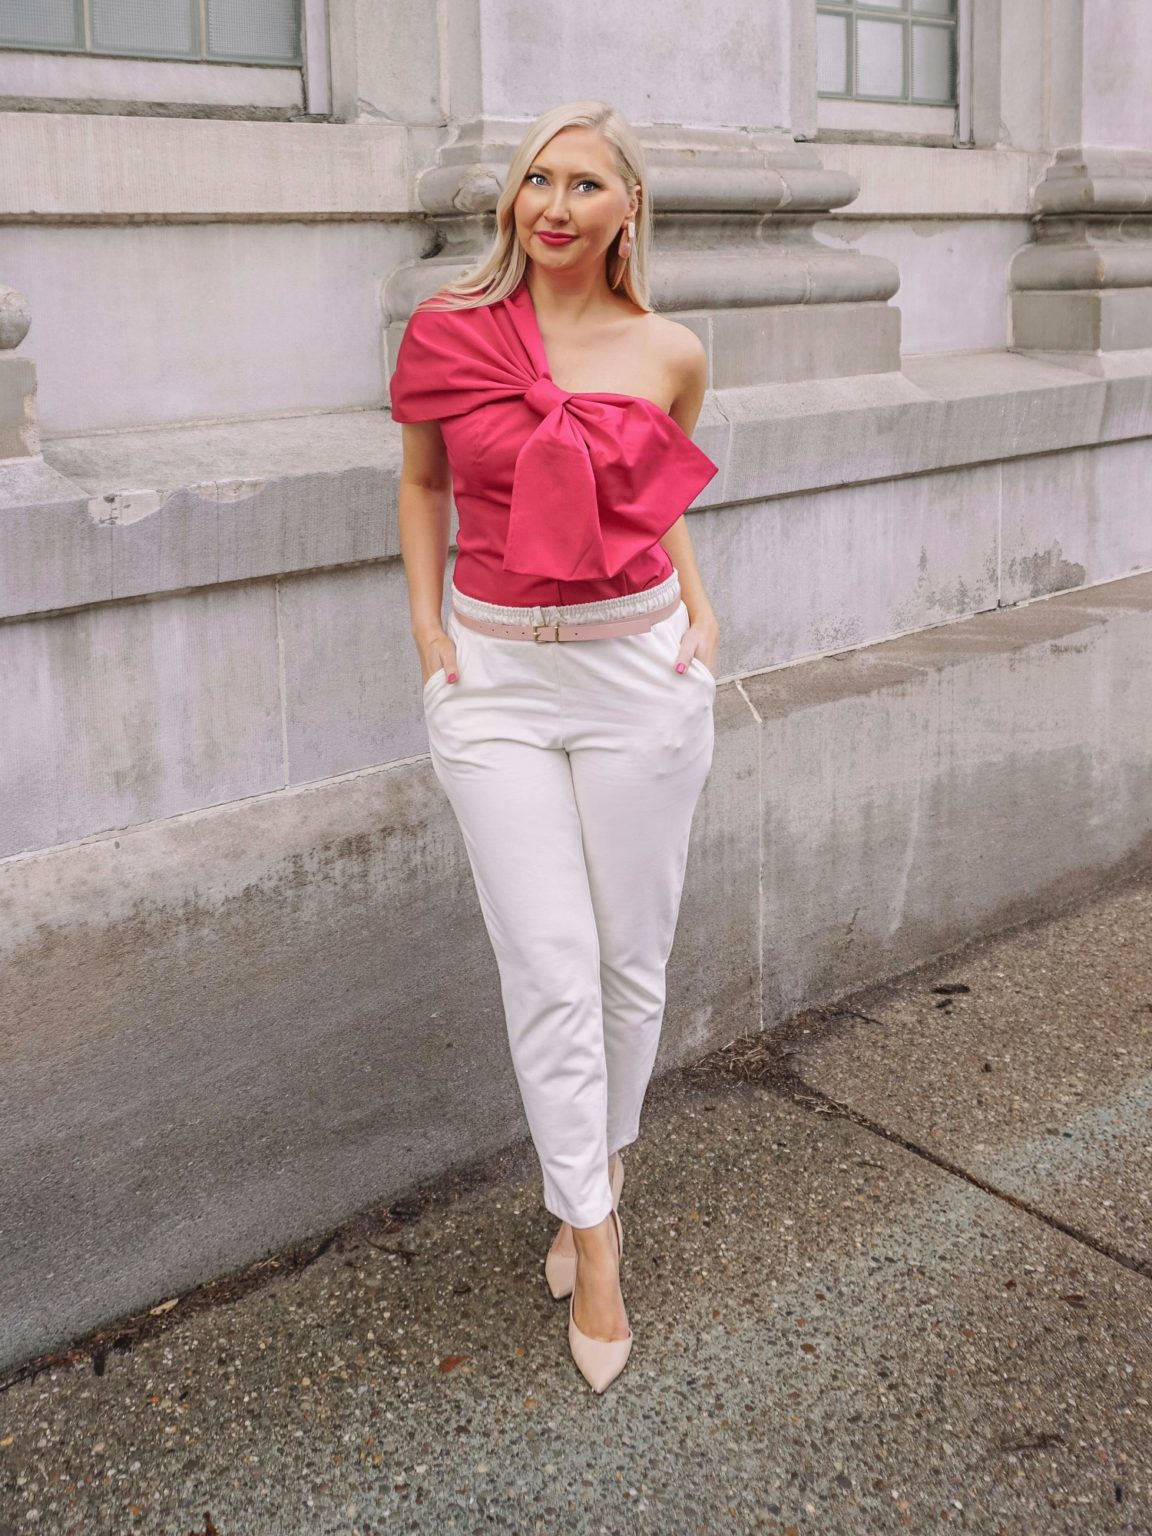 VALENTINE'S DAY LOOKS - Classic Meets Chic